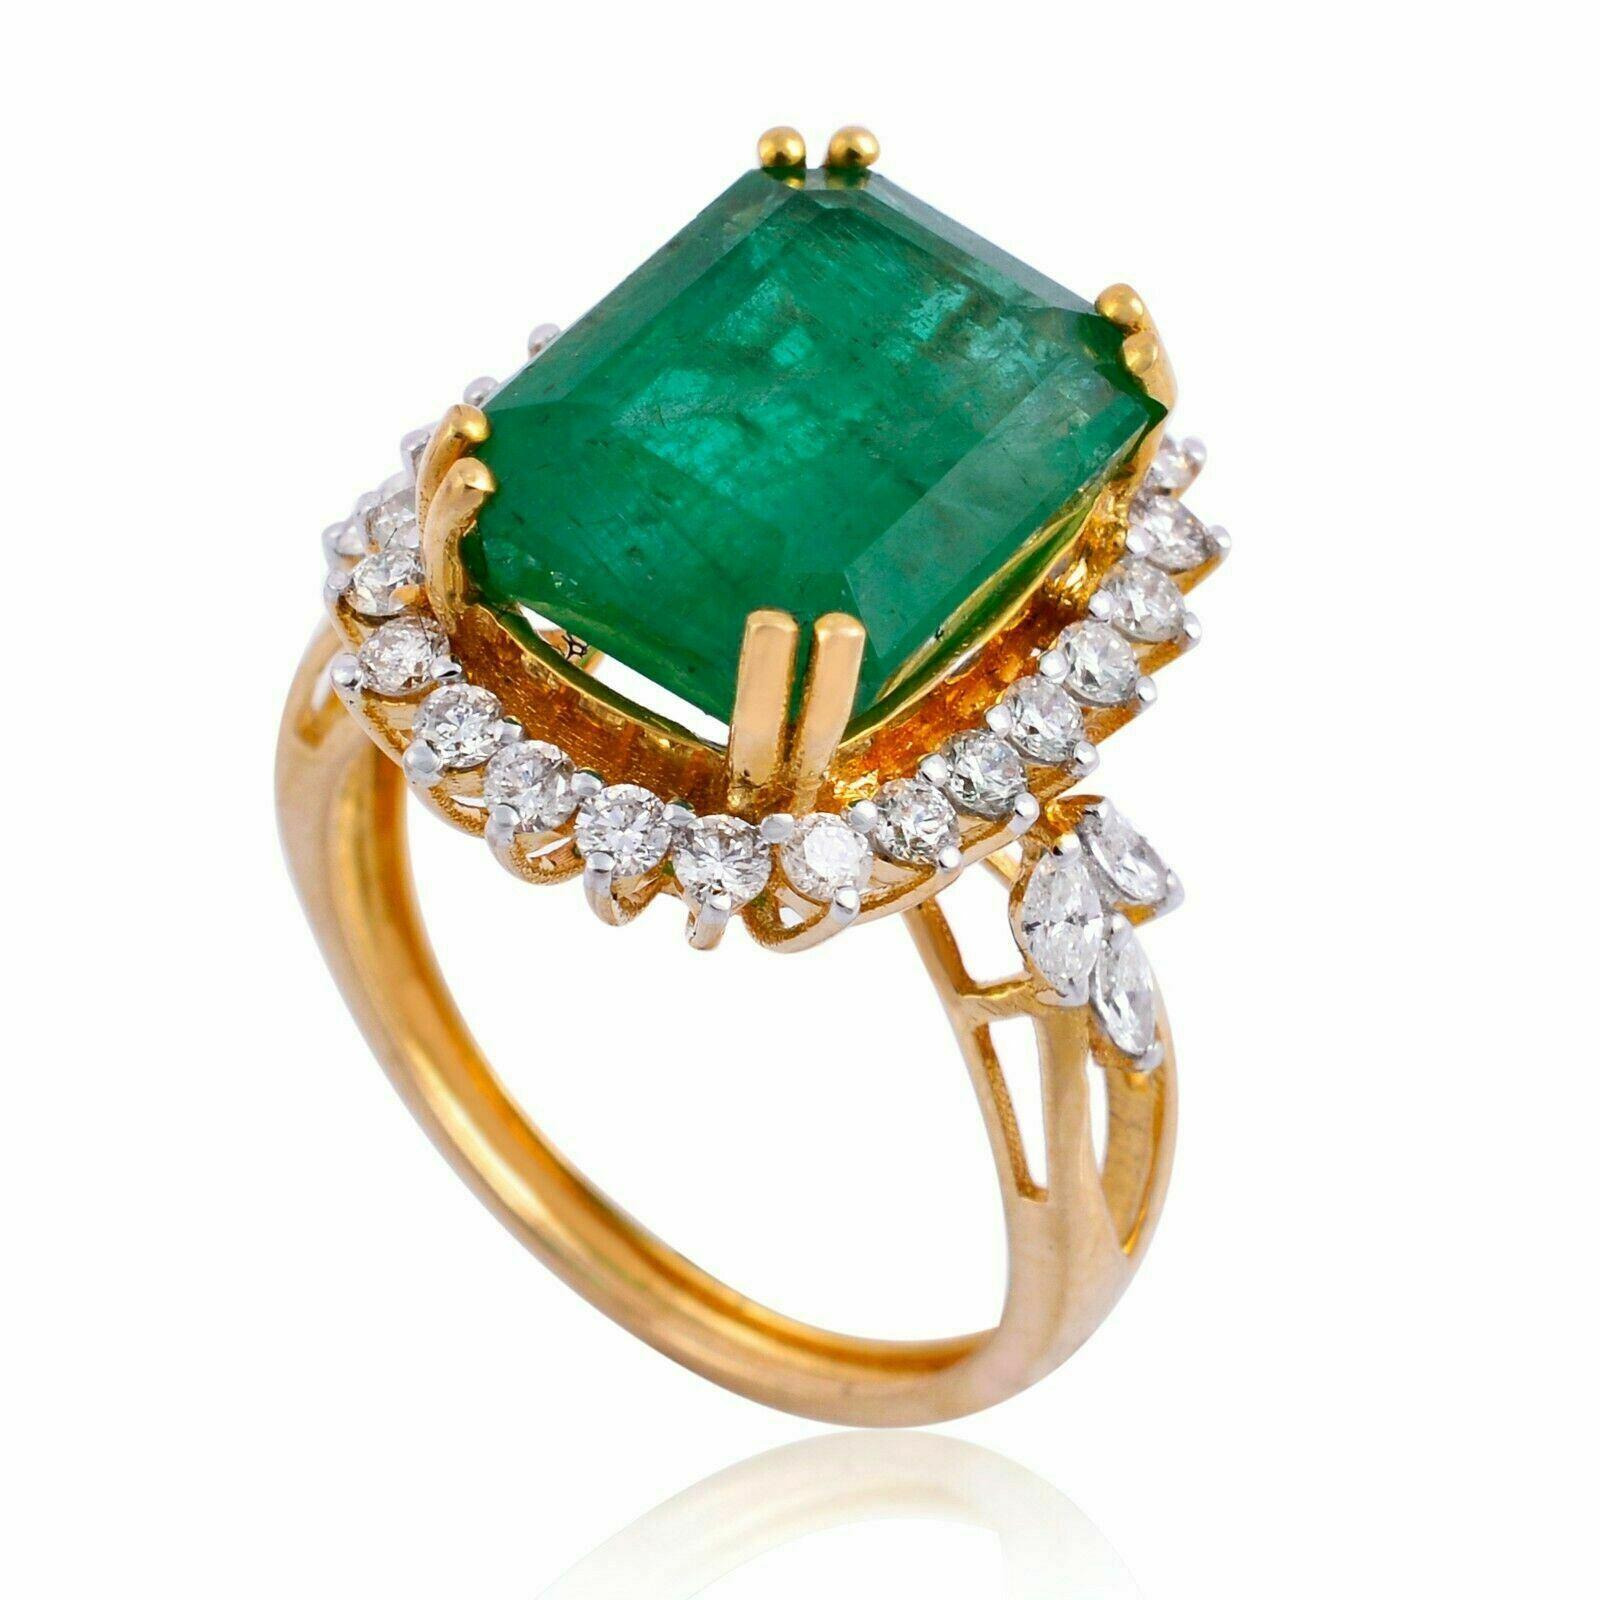 This ring has been meticulously crafted from 14-karat gold.  It is hand set with 6.45 carats emerald & .80 carats of sparkling diamonds. 

The ring is a size 7 and may be resized to larger or smaller upon request. 
FOLLOW  MEGHNA JEWELS storefront